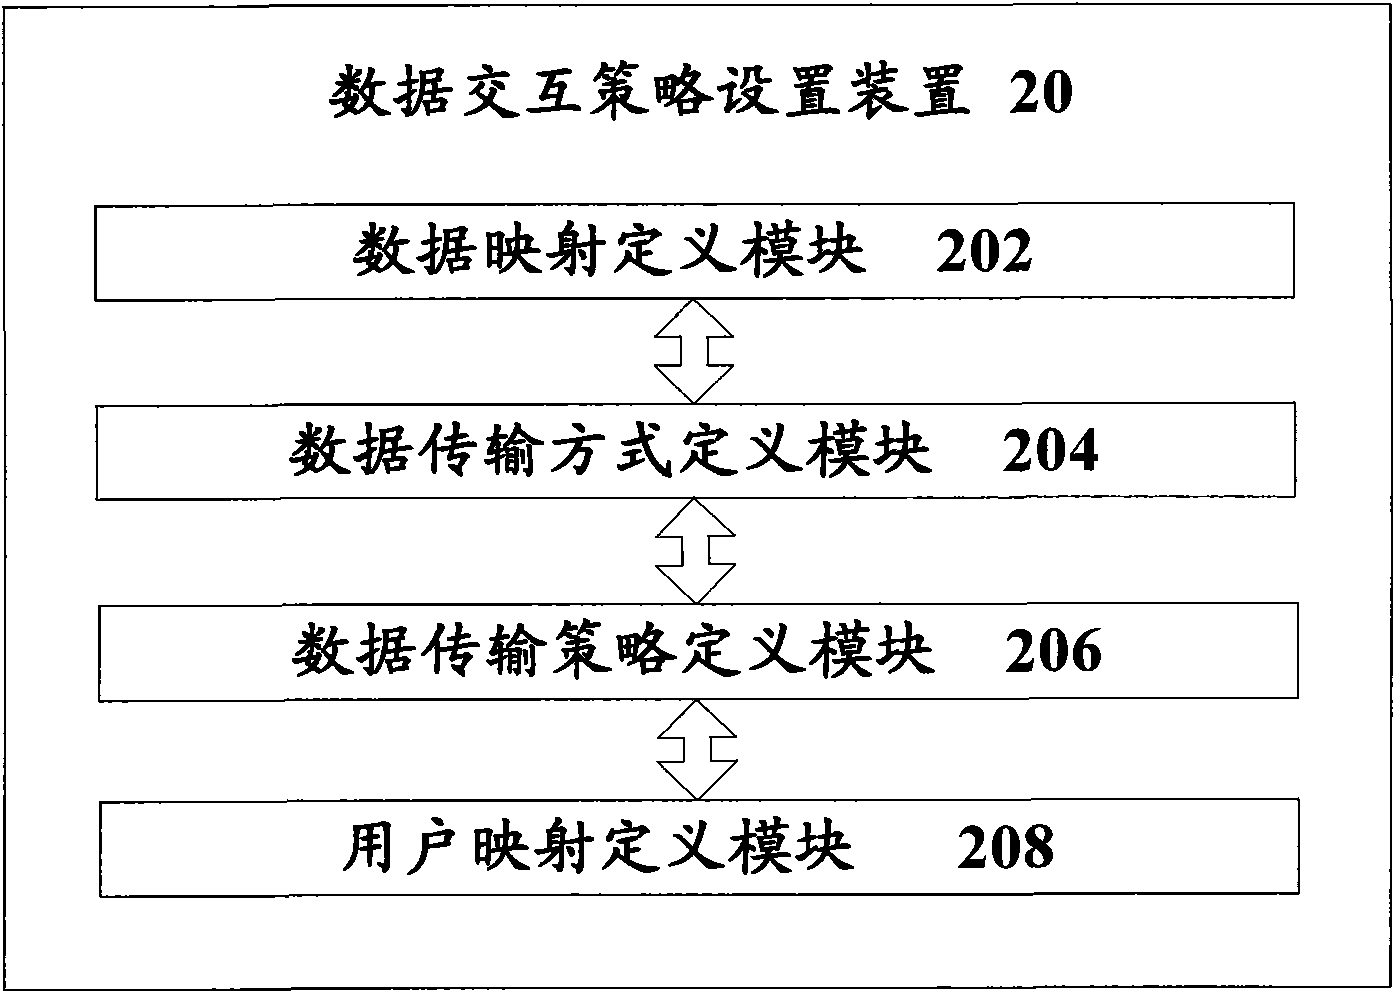 Access system and access method